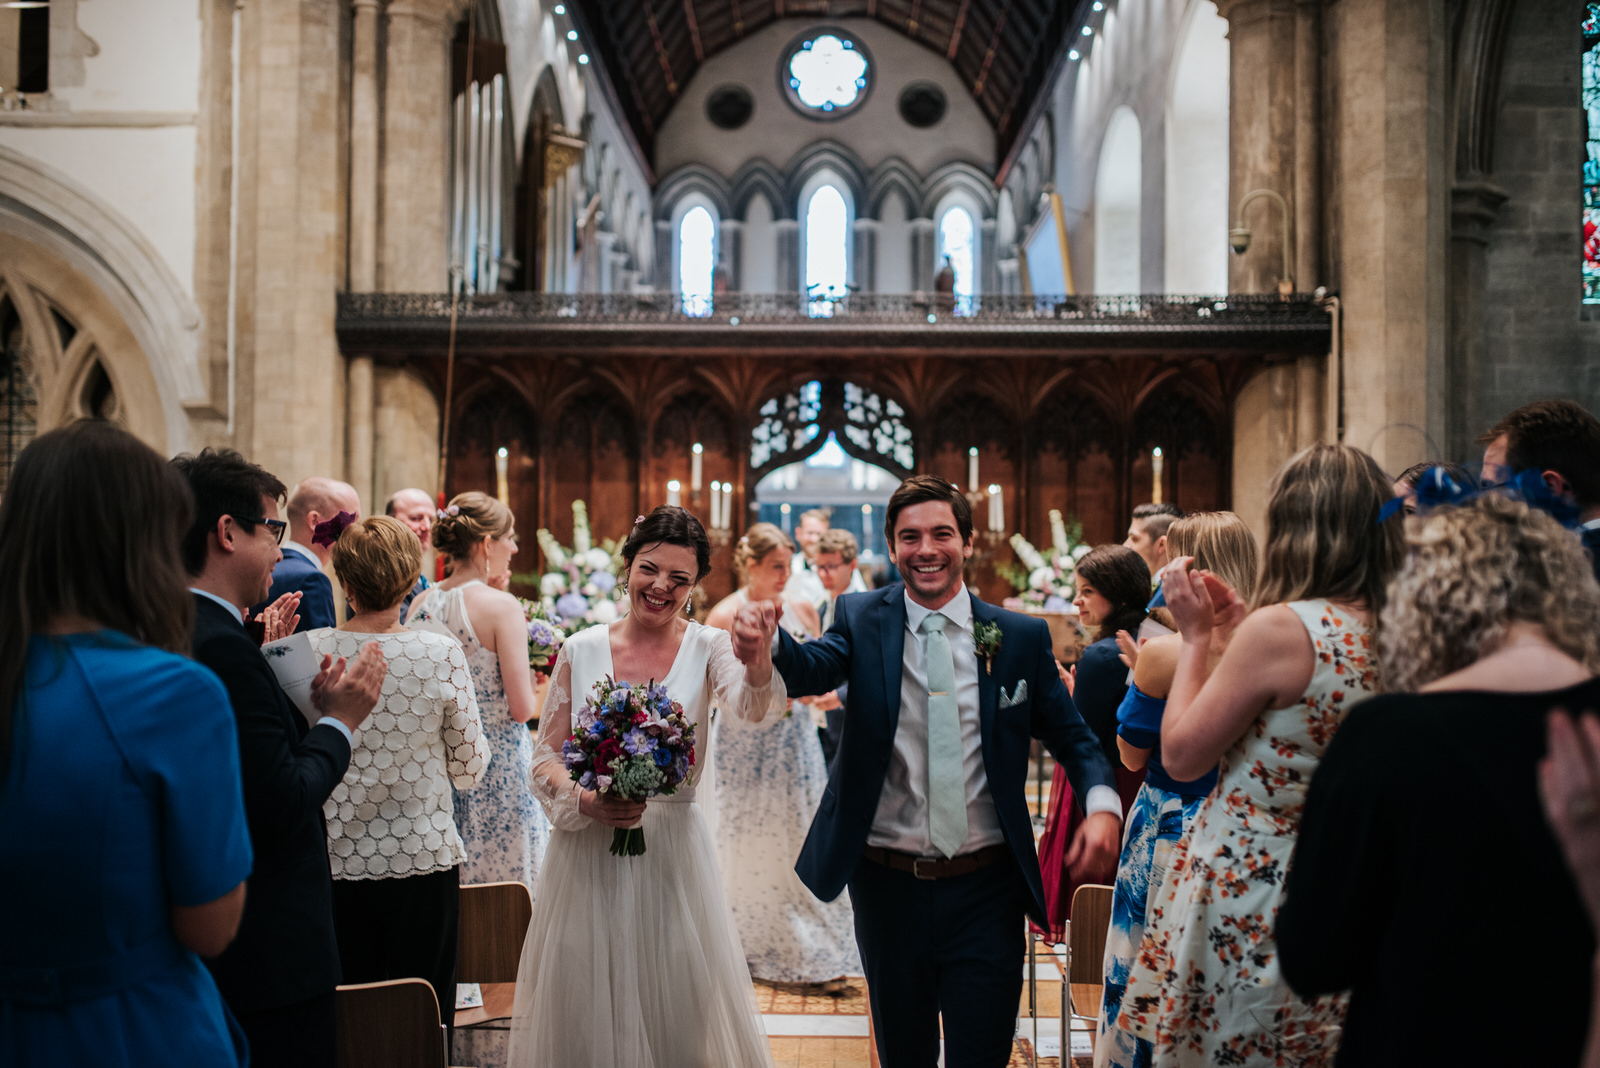 Bride and groom exit joyfully down the aisle at Jesus College Ca